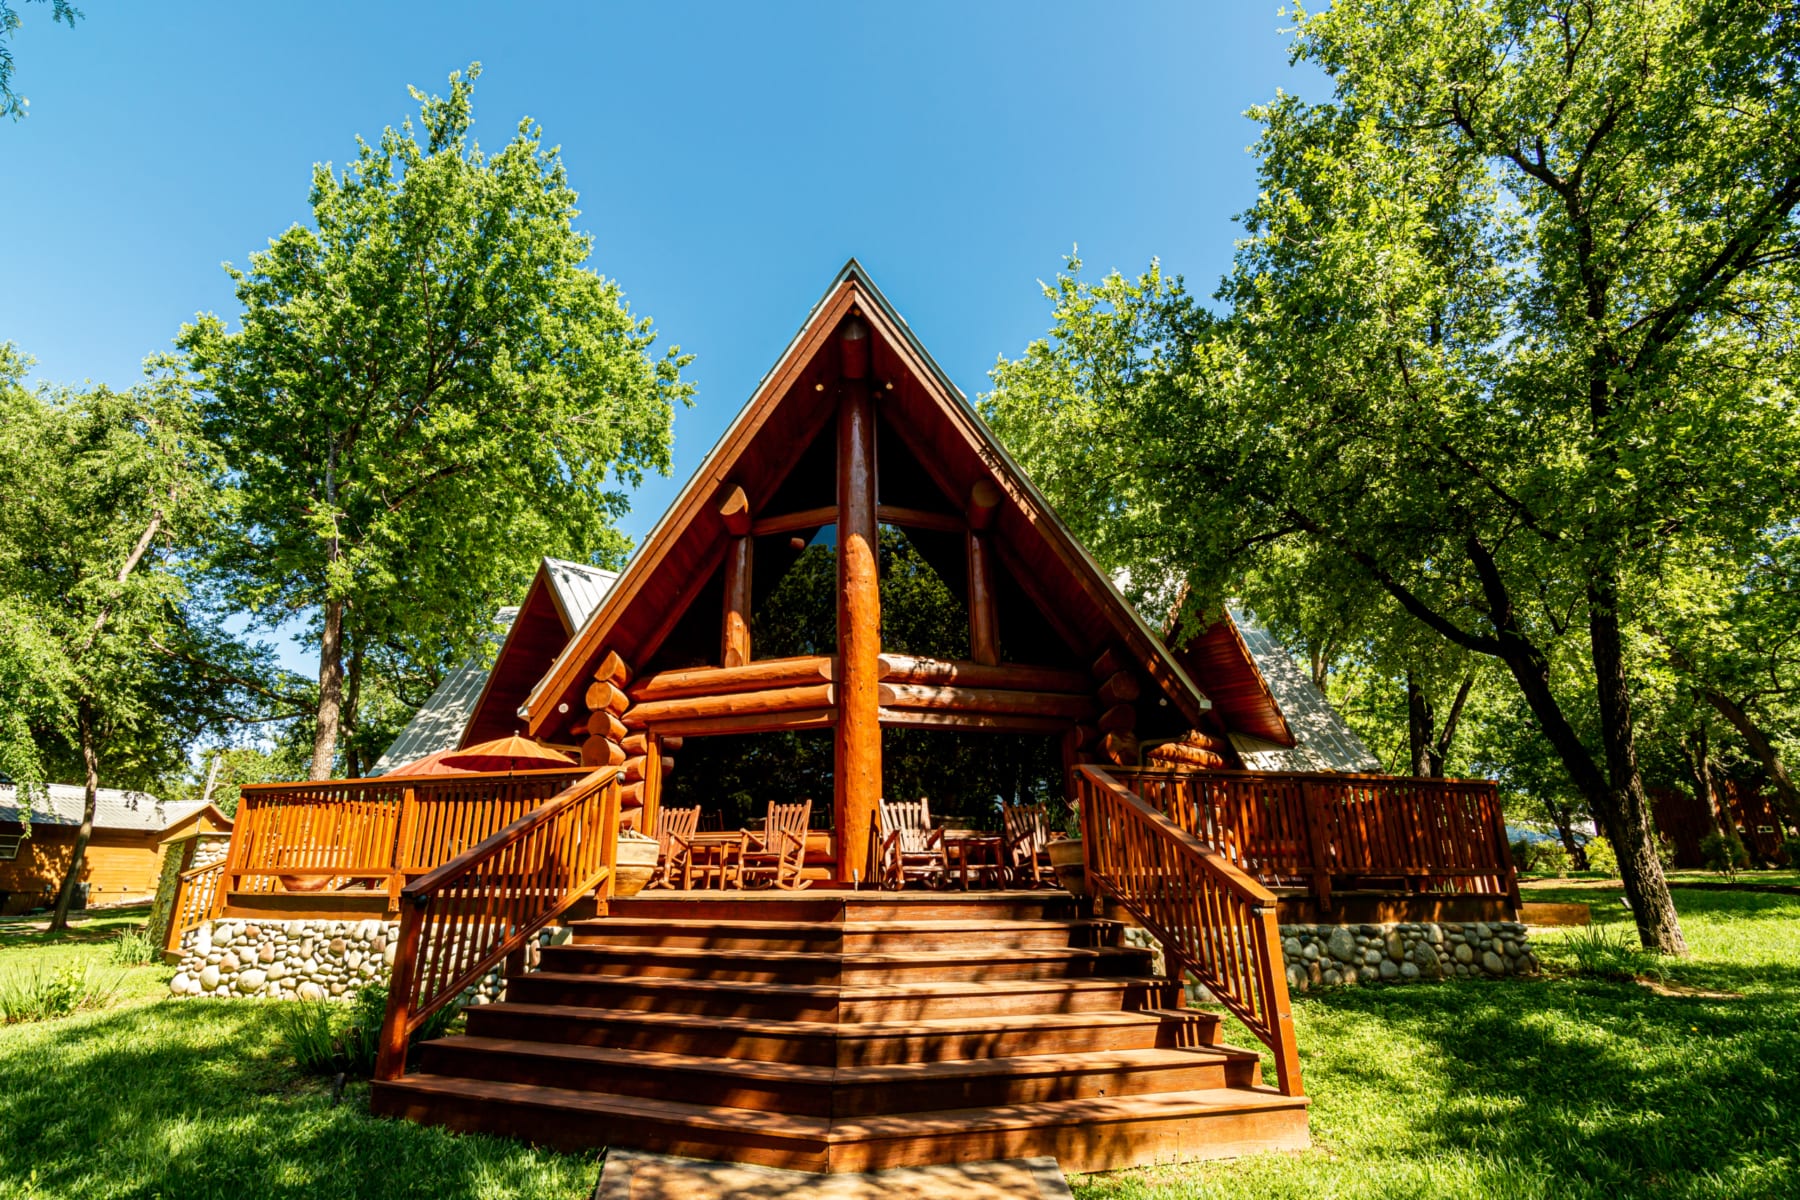 Ash Justice Crow Log Cabin Rentals in Texas - Texas Hill Country Cabin Rentals